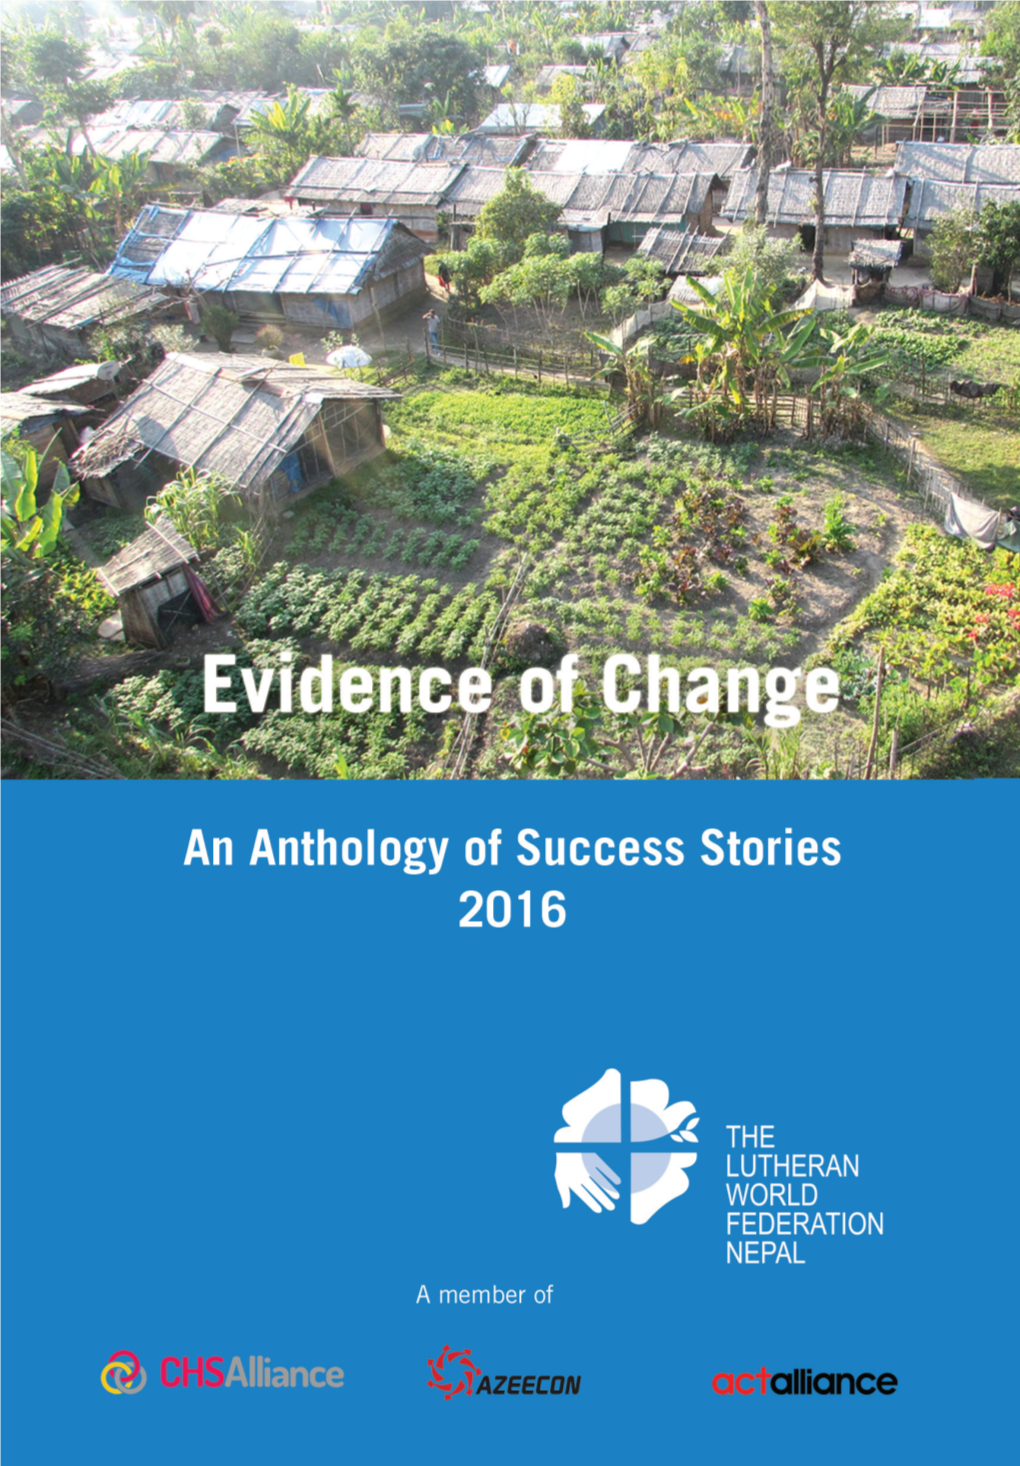 An Anthology of Success Stories 2016 1 Evidence of Change: an Anthology of Success Stories 2016 ©2016 the Lutheran World Federation Nepal